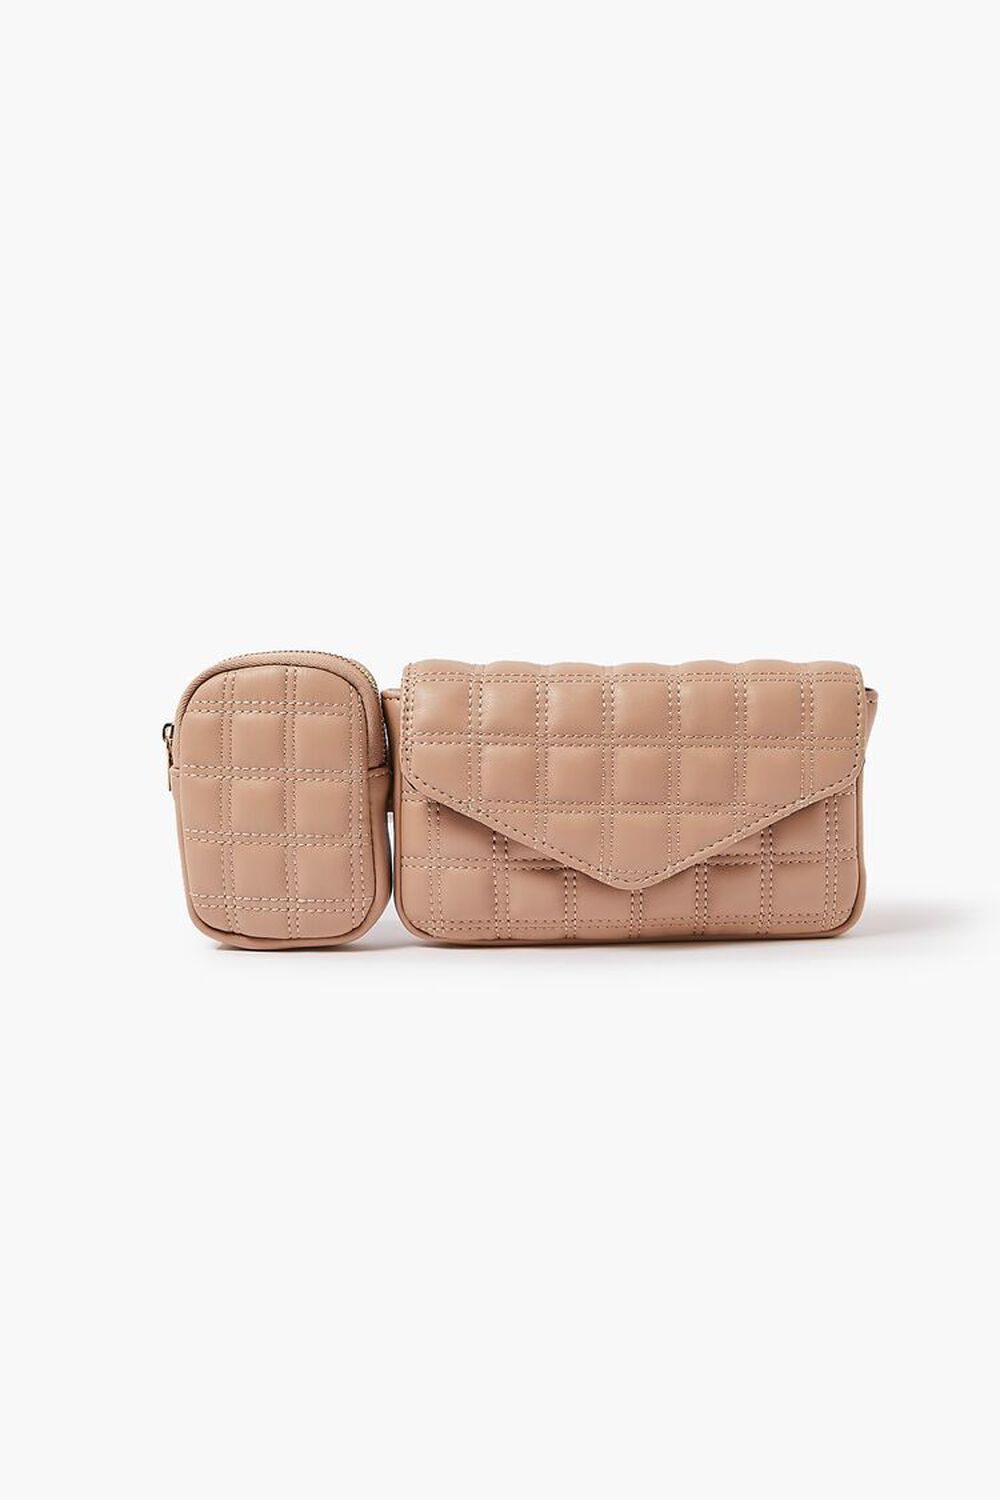 Quilted Faux Leather Fanny Pack, image 1